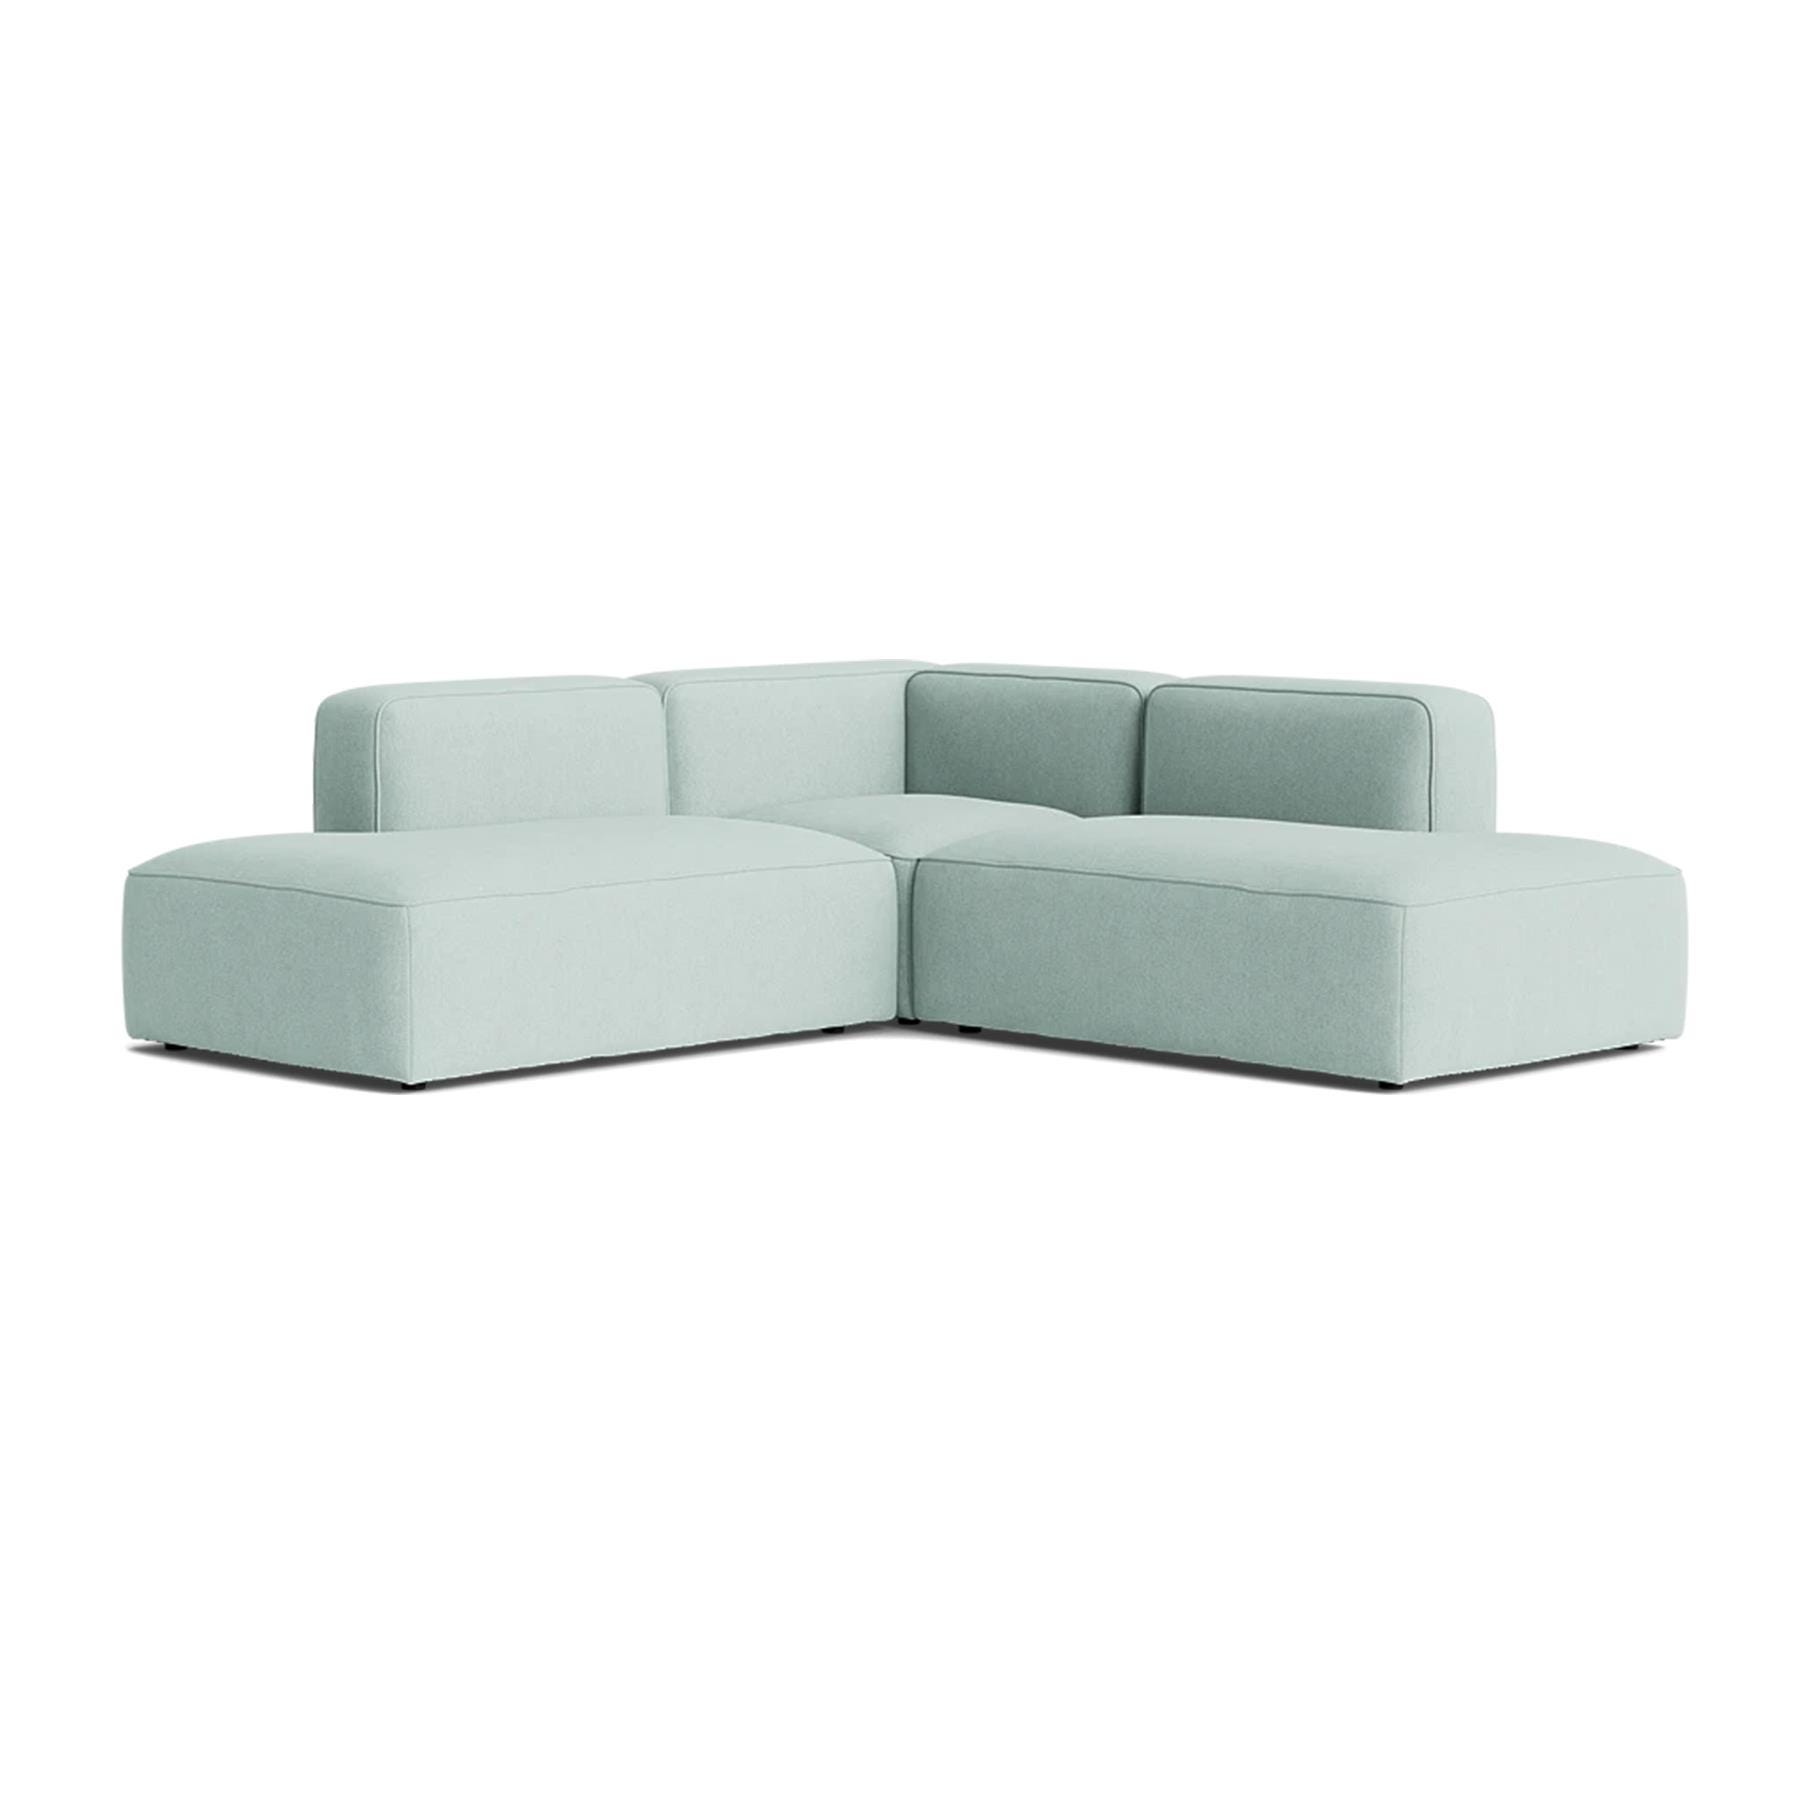 Make Nordic Basecamp Corner Sofa With Open Ends Fiord 721 Blue Designer Furniture From Holloways Of Ludlow